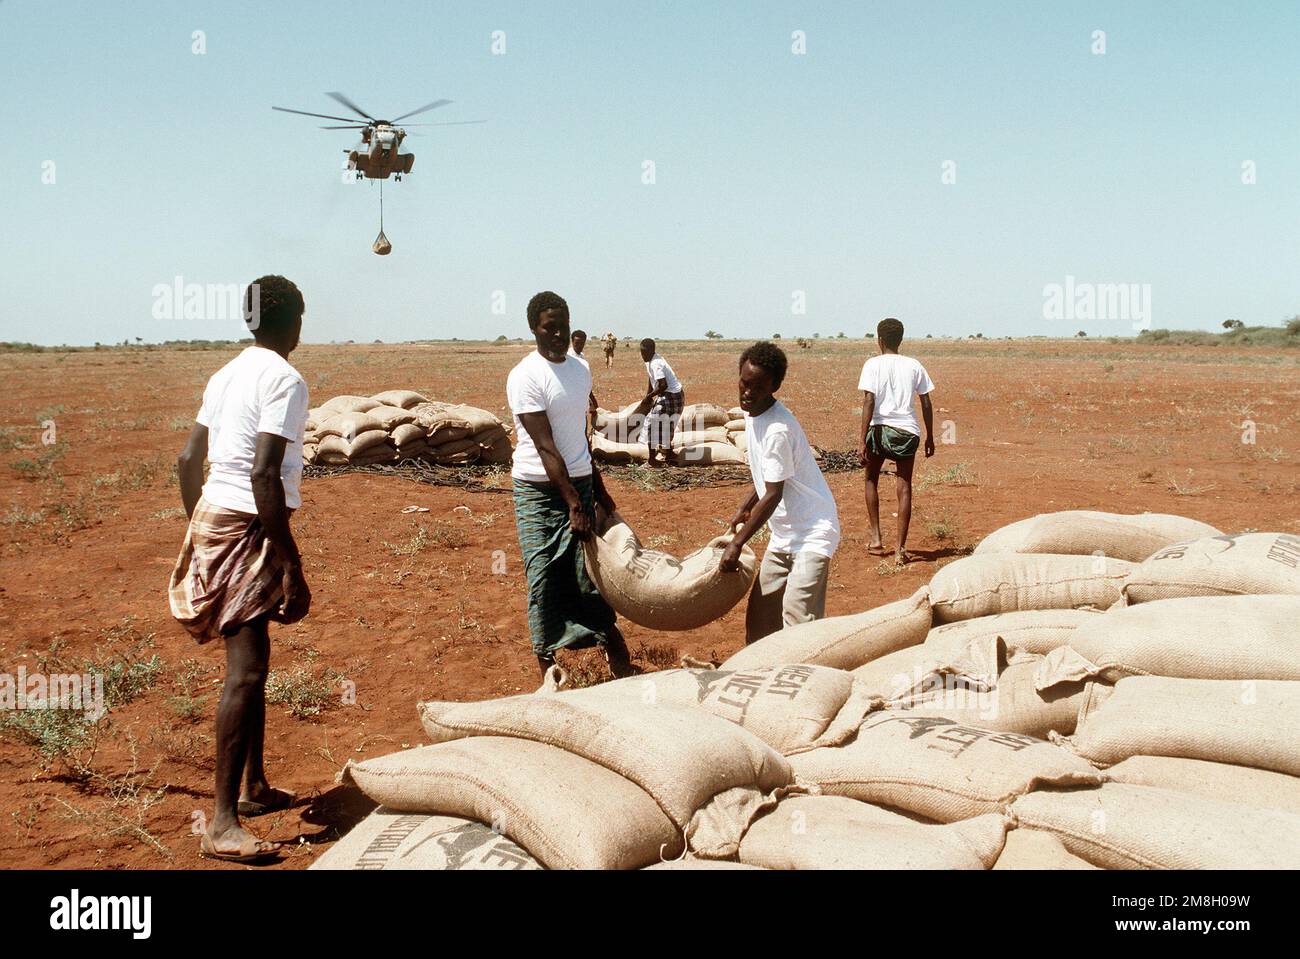 Men from the village of Maleel stack bags of wheat as a Marine Heavy Helicopter Squadron 363 (HMH-363) CH-53D Sea Stallion helicopter prepaers to drop another load during the multinational relief effort OPERATION RESTORE HOPE. The grain, donated by Australia, is being delivered by helicopter insterad of truck convoy because it is suspected that the roads to t he village have been mined. Subject Operation/Series: RESTORE HOPE Country: Somalia (SOM) Stock Photo